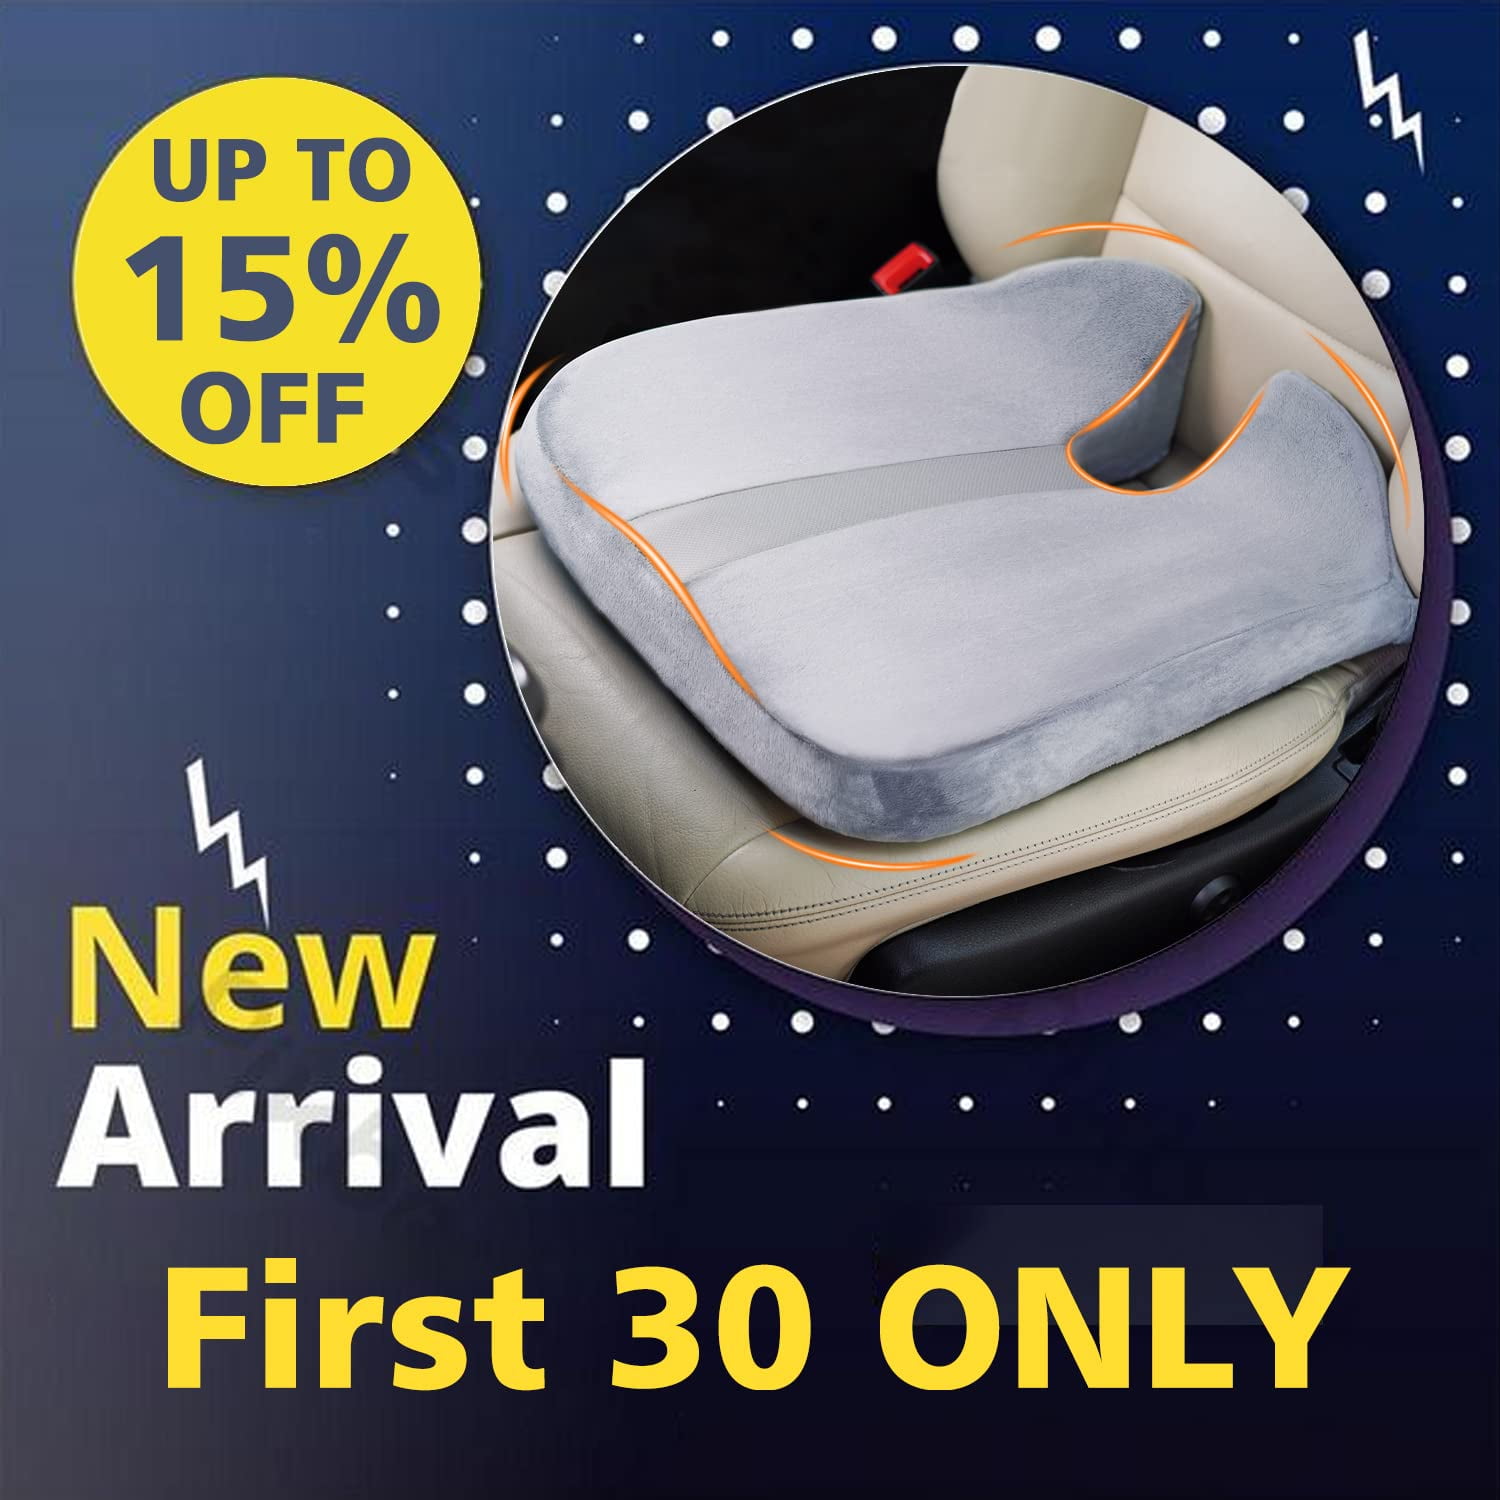 DrCarNow Car Seat Cushion Coccyx Pad for Tailbone Pain Relief Lower Back  Pain Pressure Relief. Seat Cushion for Long Sitting Hours on Office Home